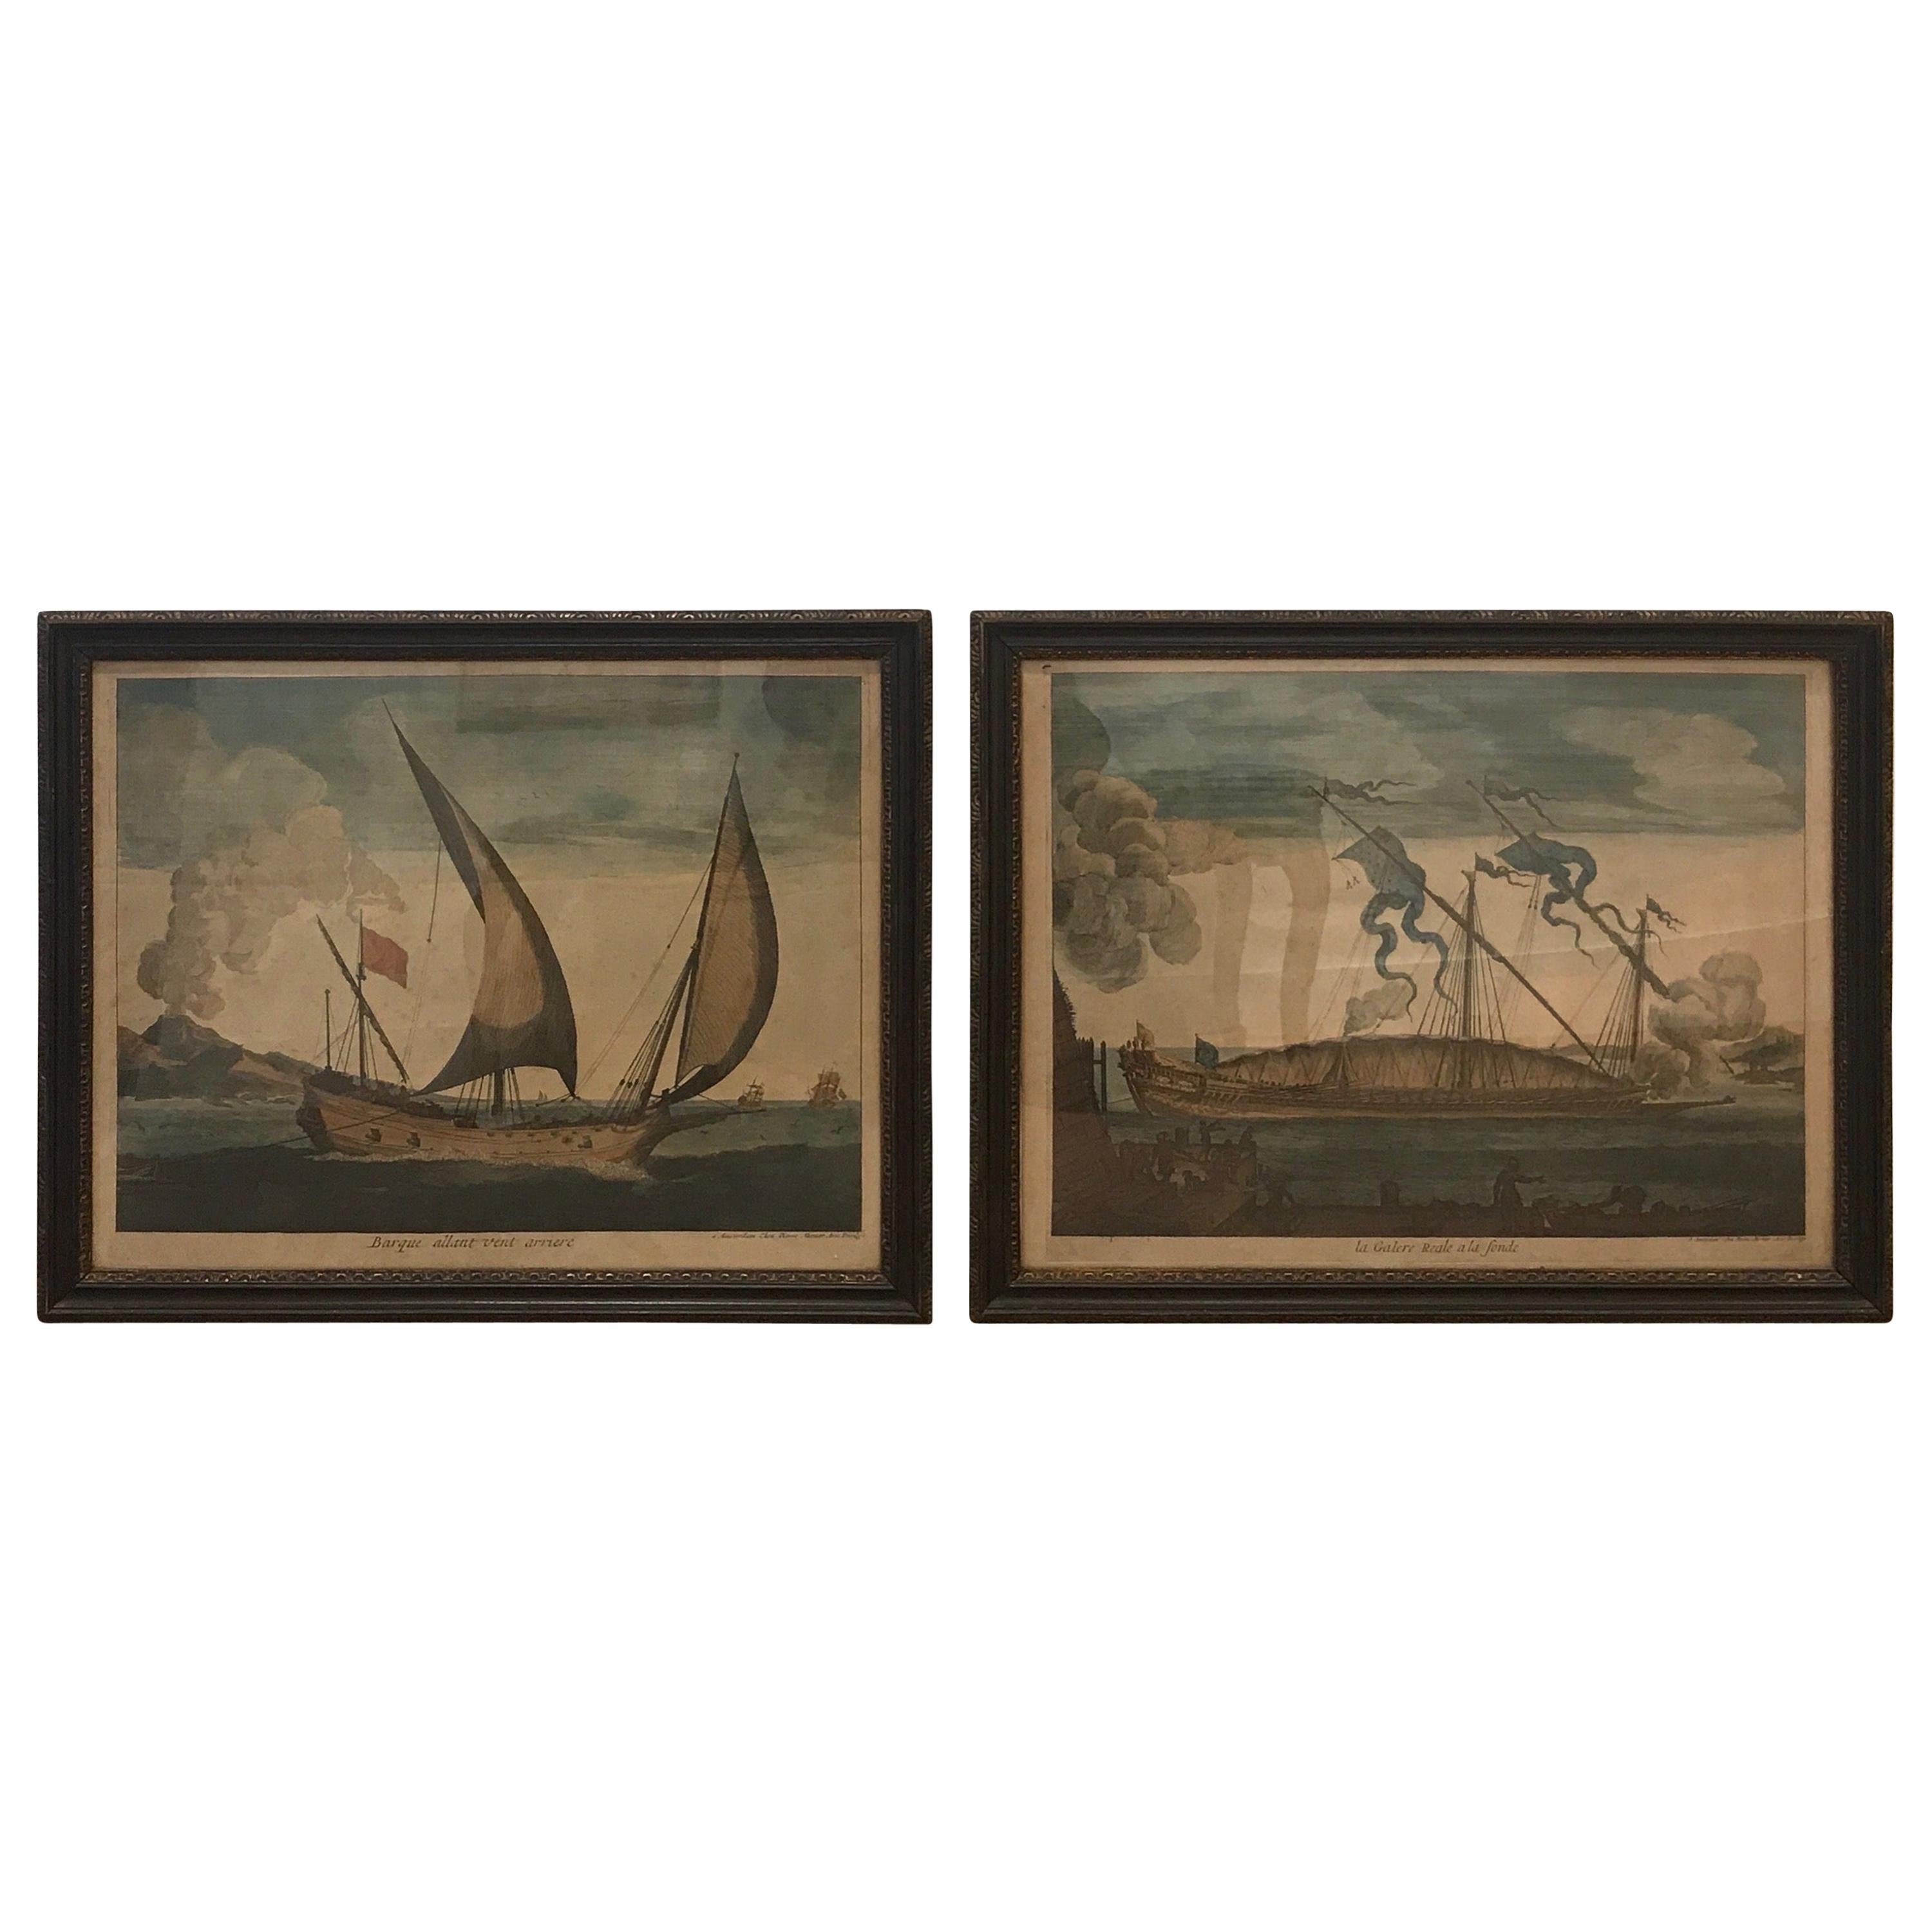 Pair of Late 17th Century Century Dutch Nautical Hand Colored Engraving Prints